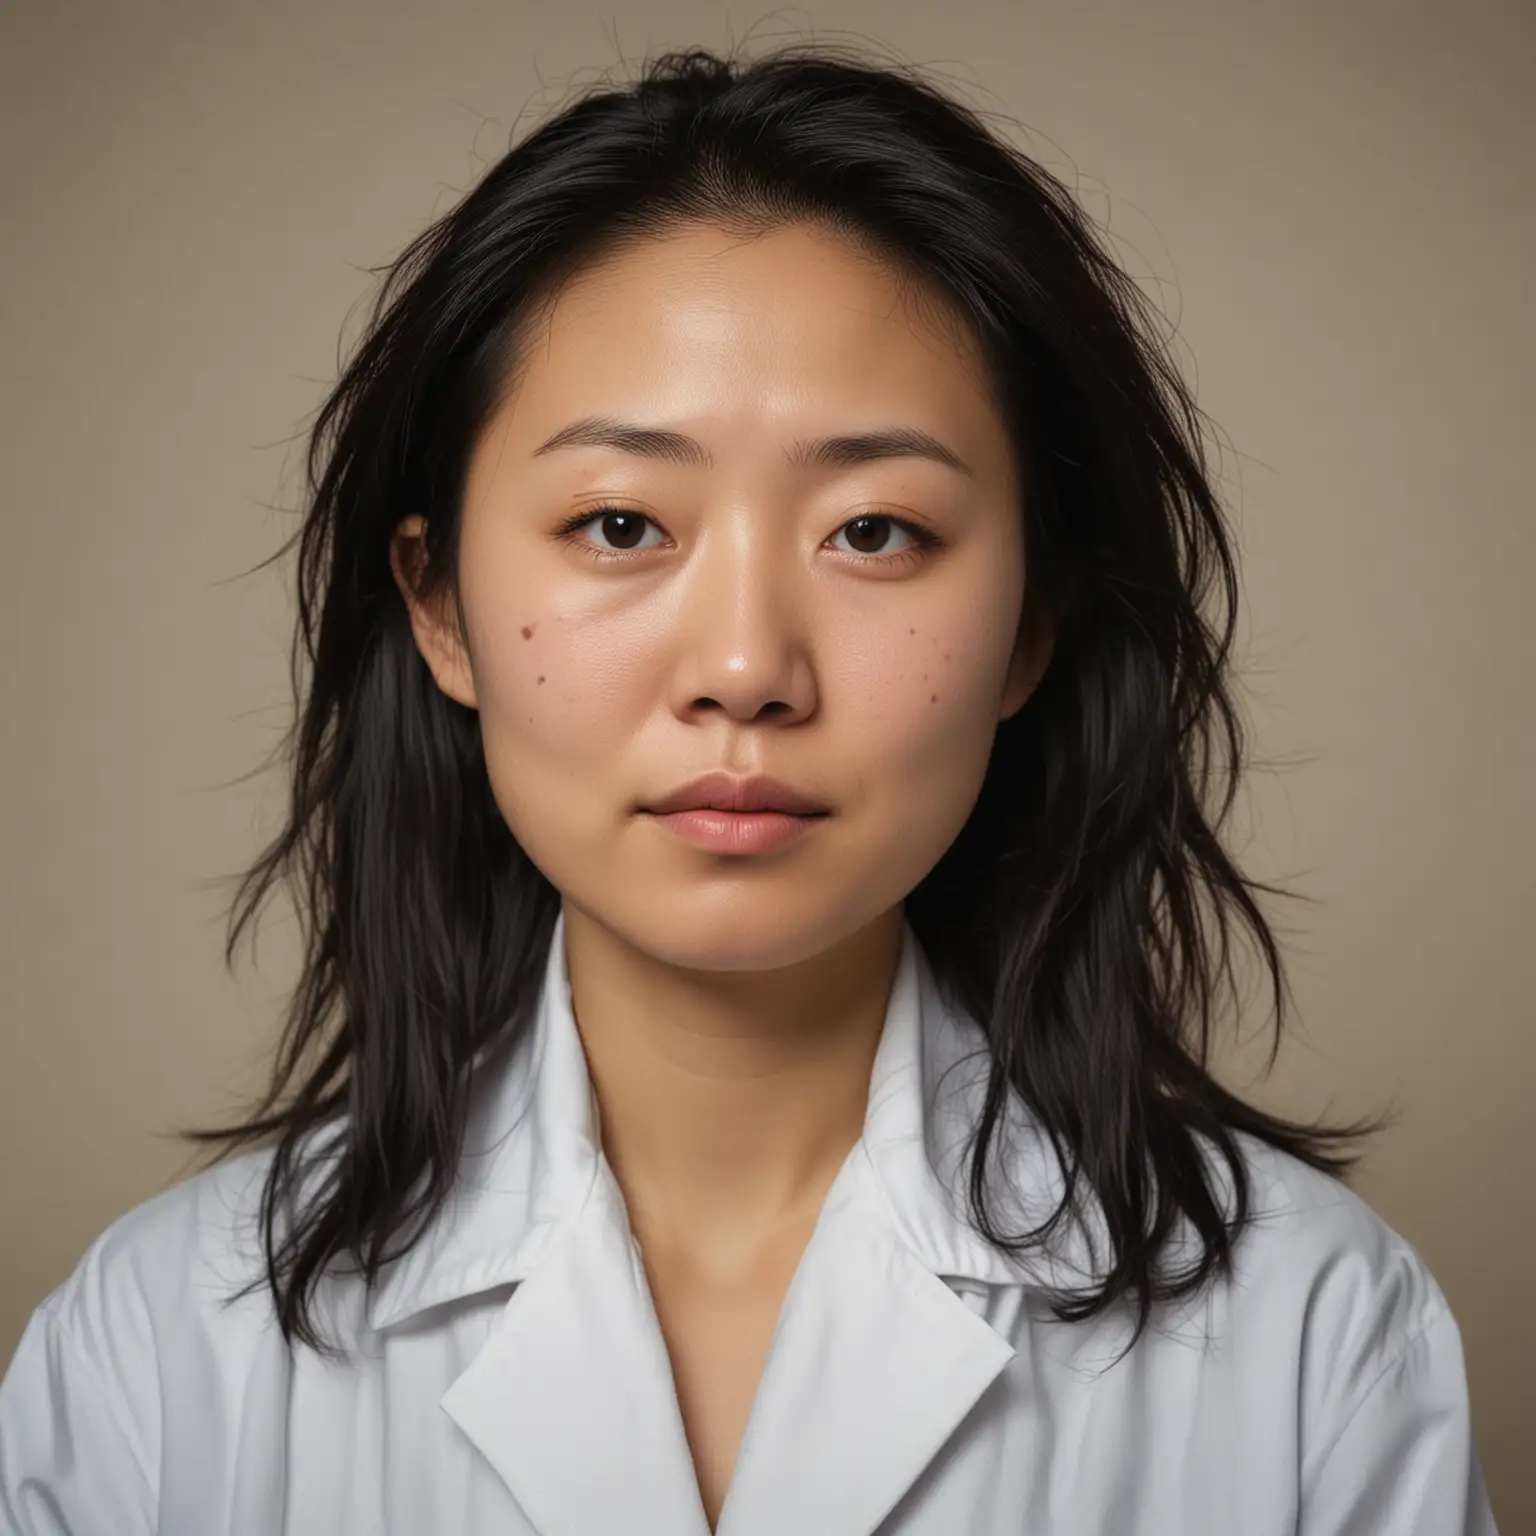 Disheveled Chinese American Woman in Lab Coat Portrait